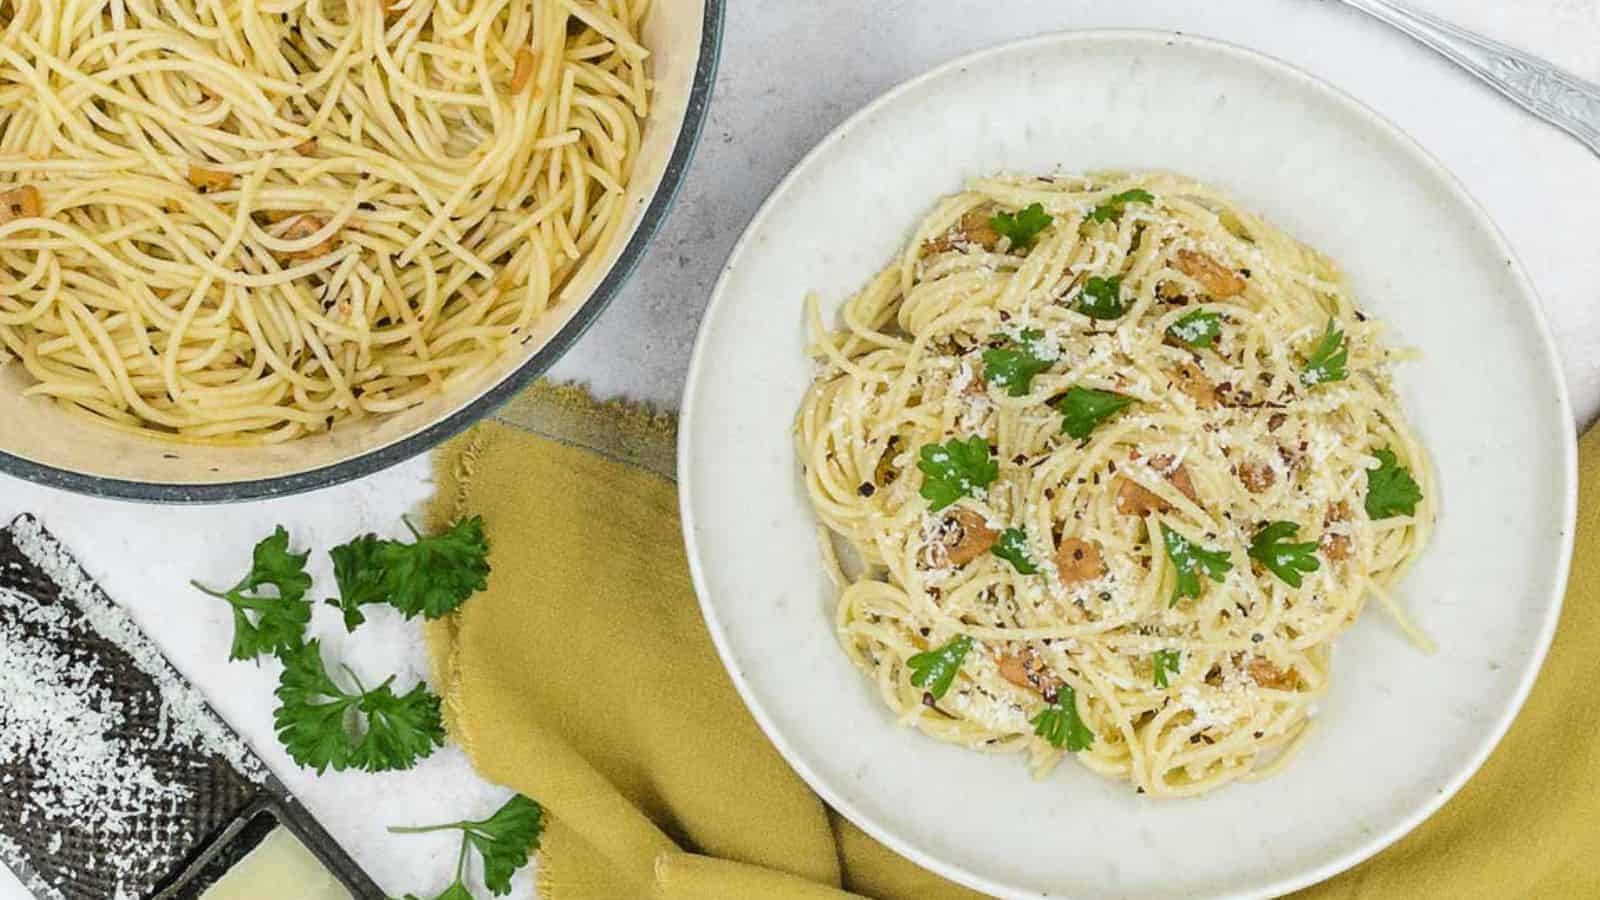 A delicious and simple pasta recipe topped with parmesan cheese and parsley.